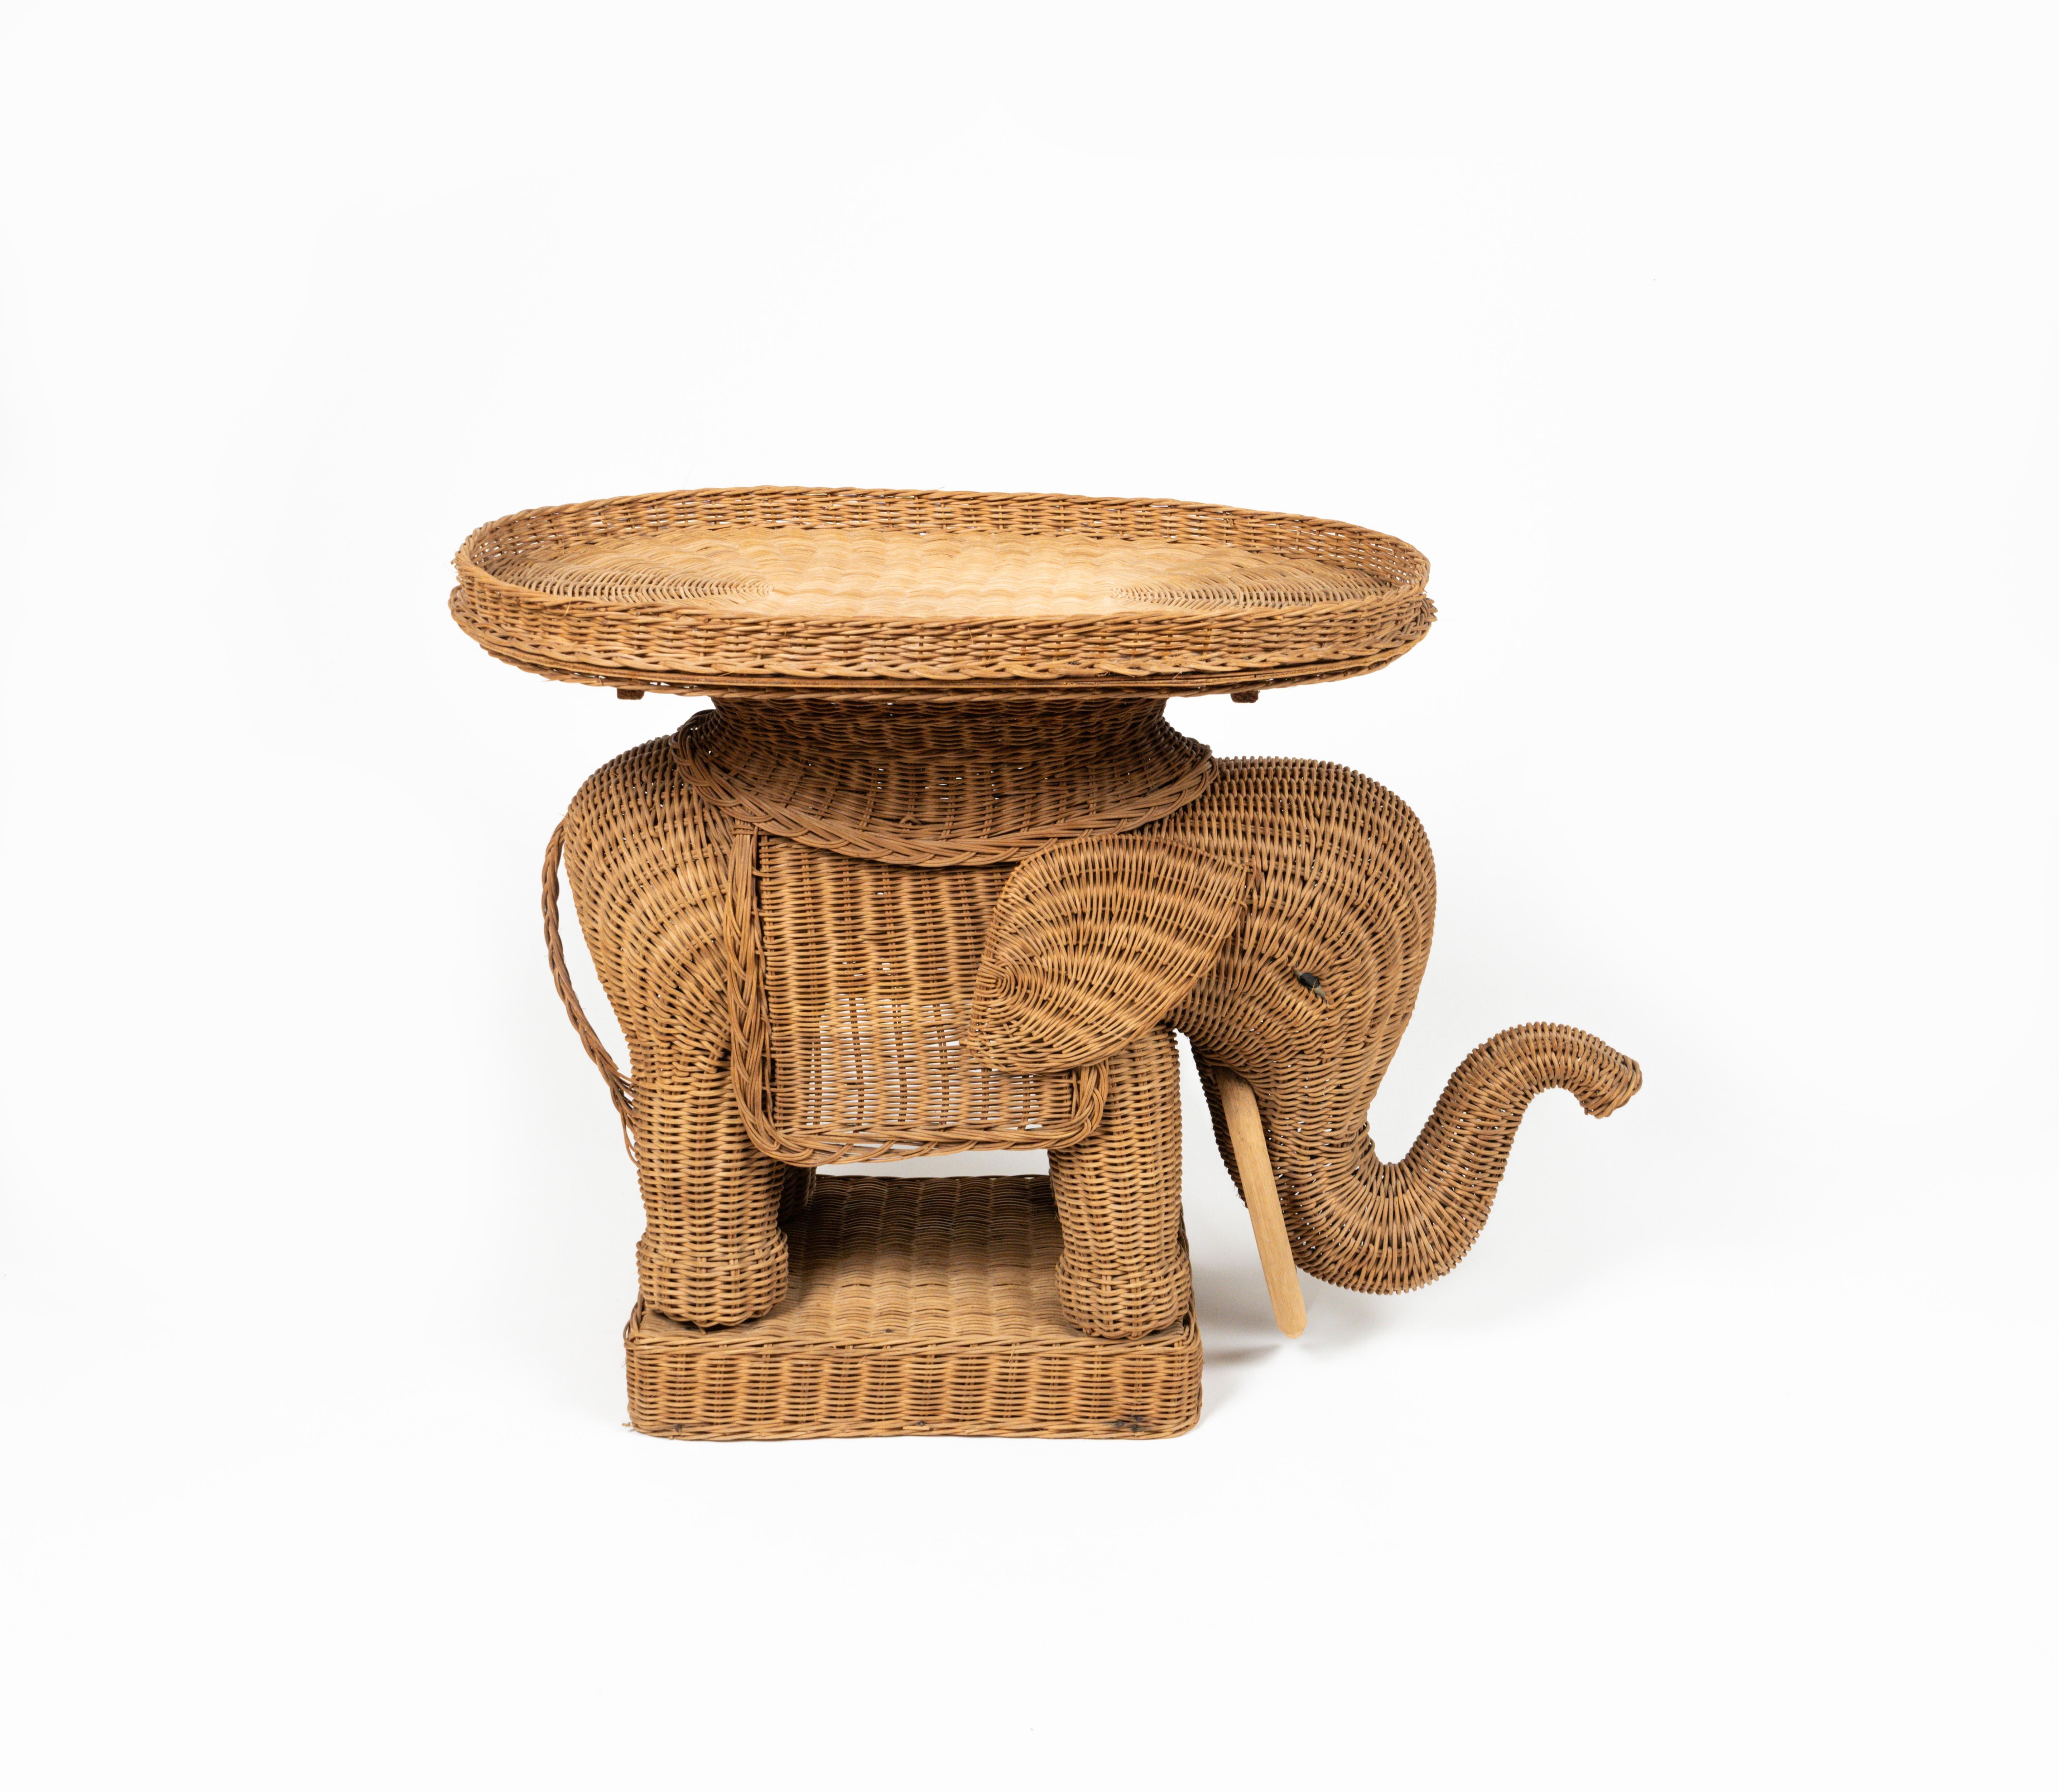 Amazing Midcentury Elephant-shaped coffee table / side table in hand-braided rattan with wood tusks in the style of Vivai Del Sud.

It also has a removable wicker tray on top of it.

Made in Italy in the 1960s.

Vivai del sud, Gabriella Crespi and